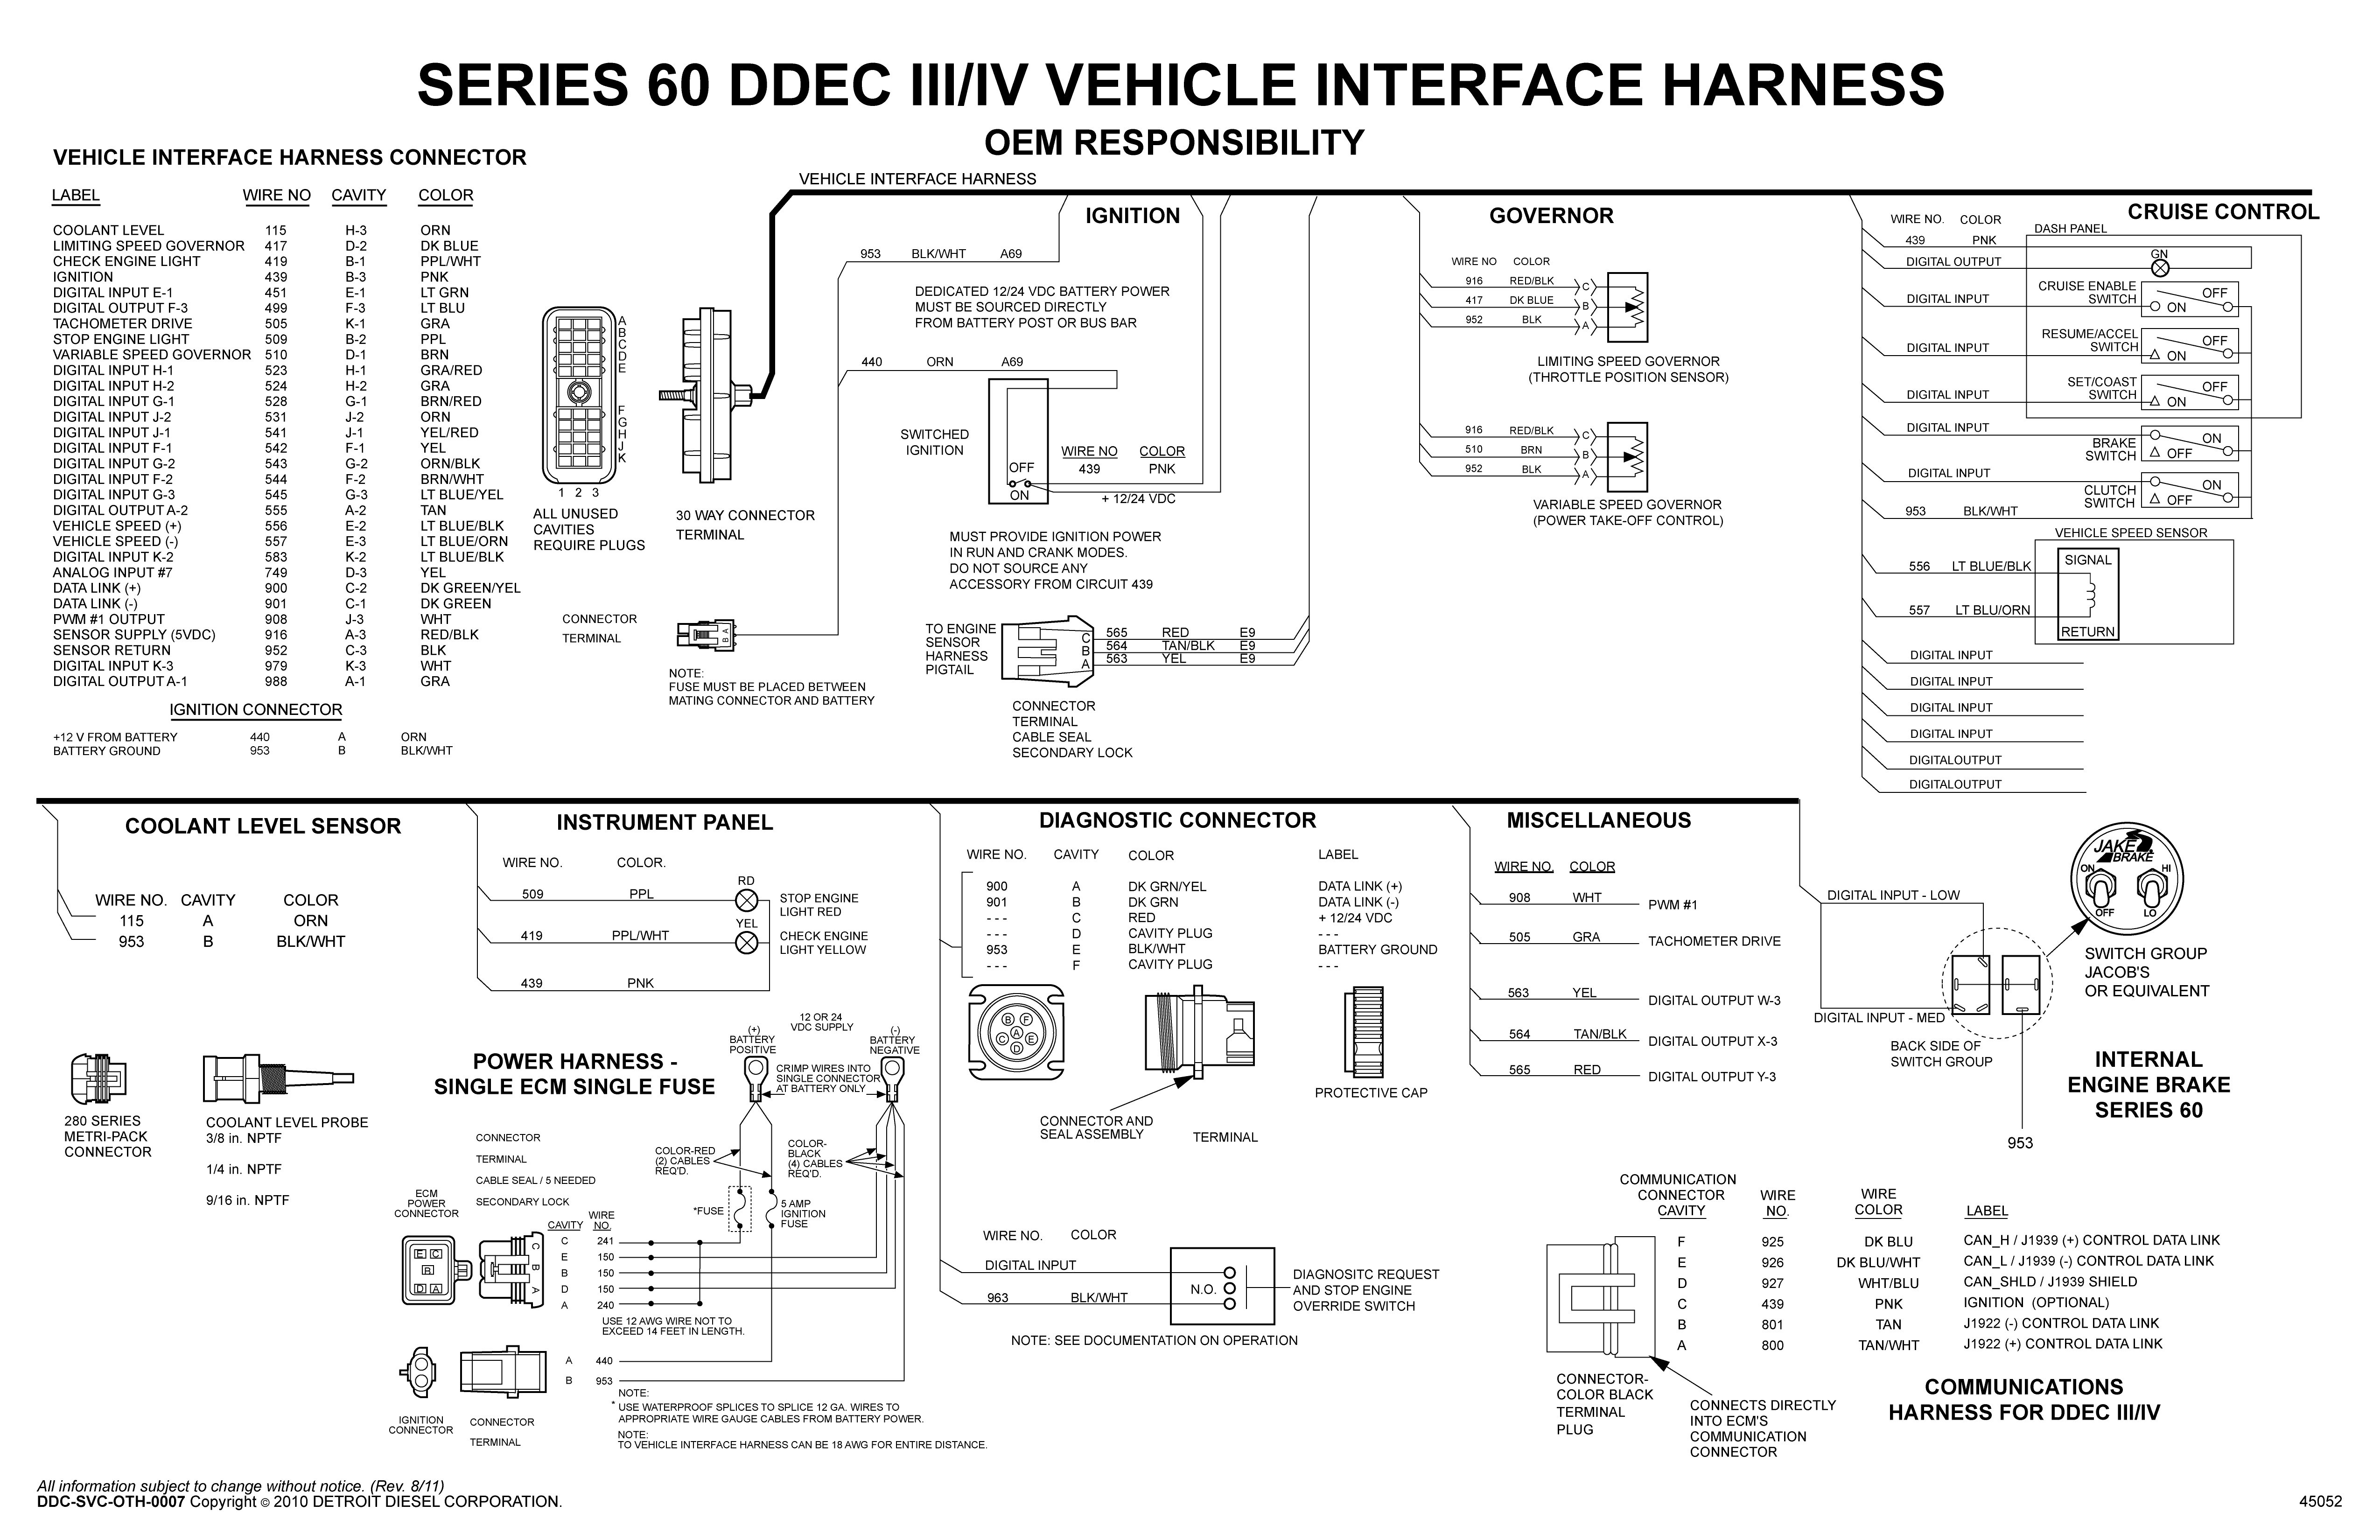 Data Link Connector Wiring Diagram Awesome Awesome Throttle Position Sensor Wiring Diagram Ideas Electrical